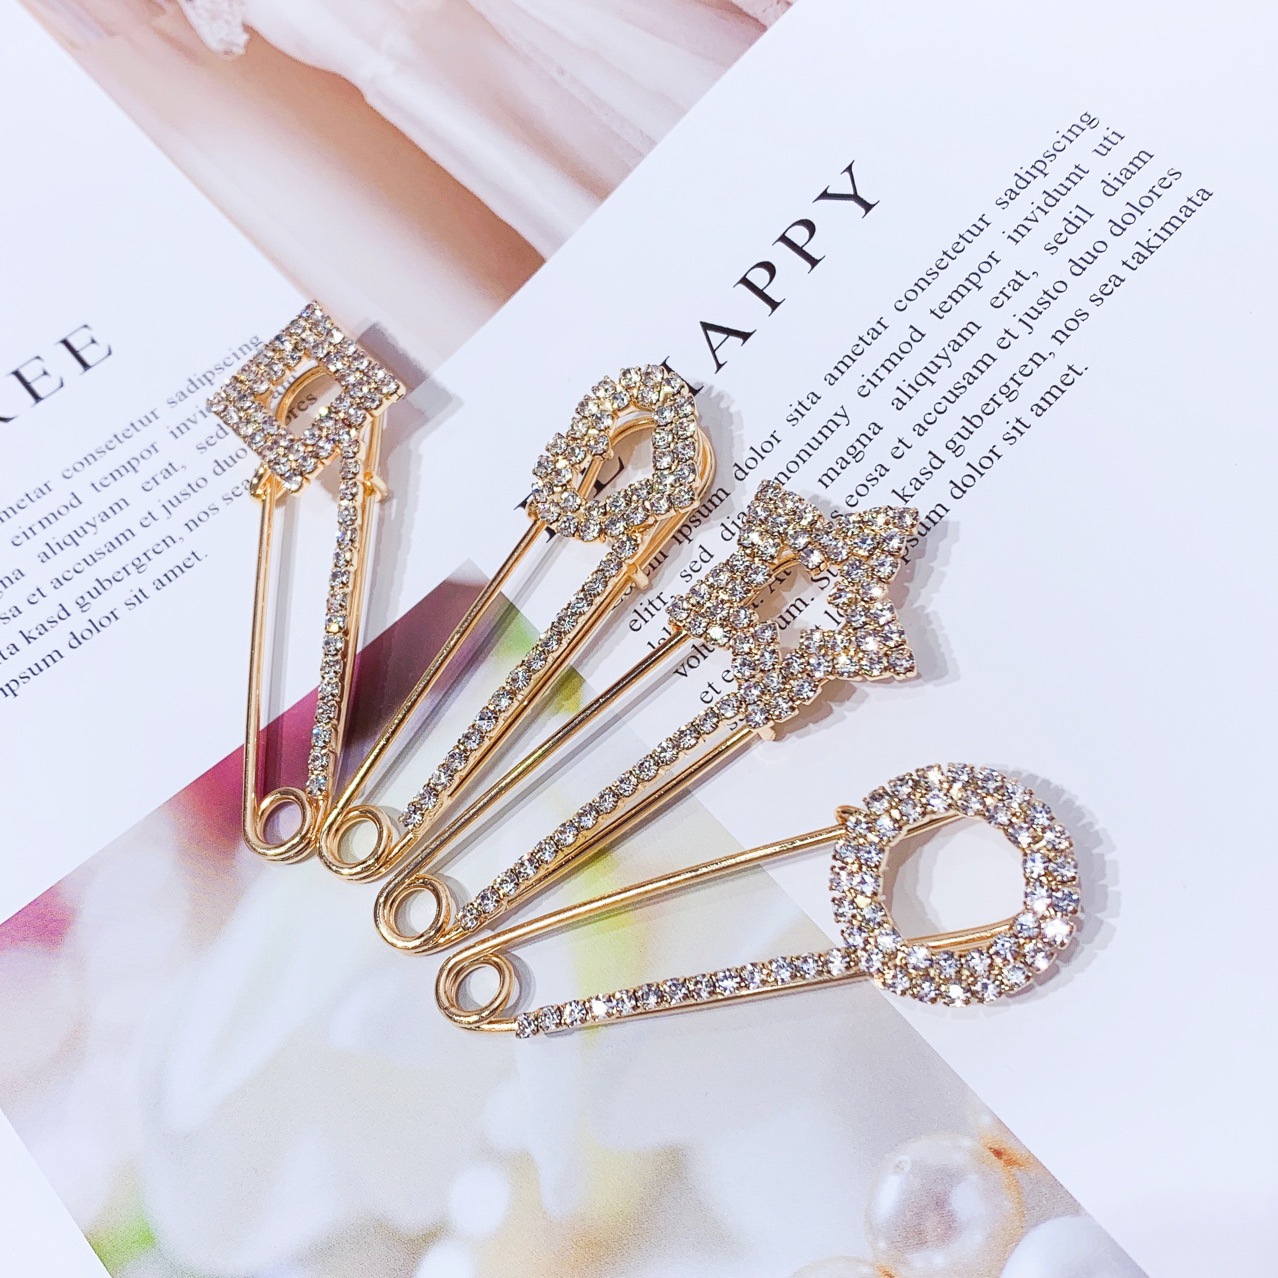 Clothing Cardigan Small Pin Korean All-Match Corsage Clothing Accessories Ins Crystal Brooch Female Anti-Unwanted-Exposure Buckle